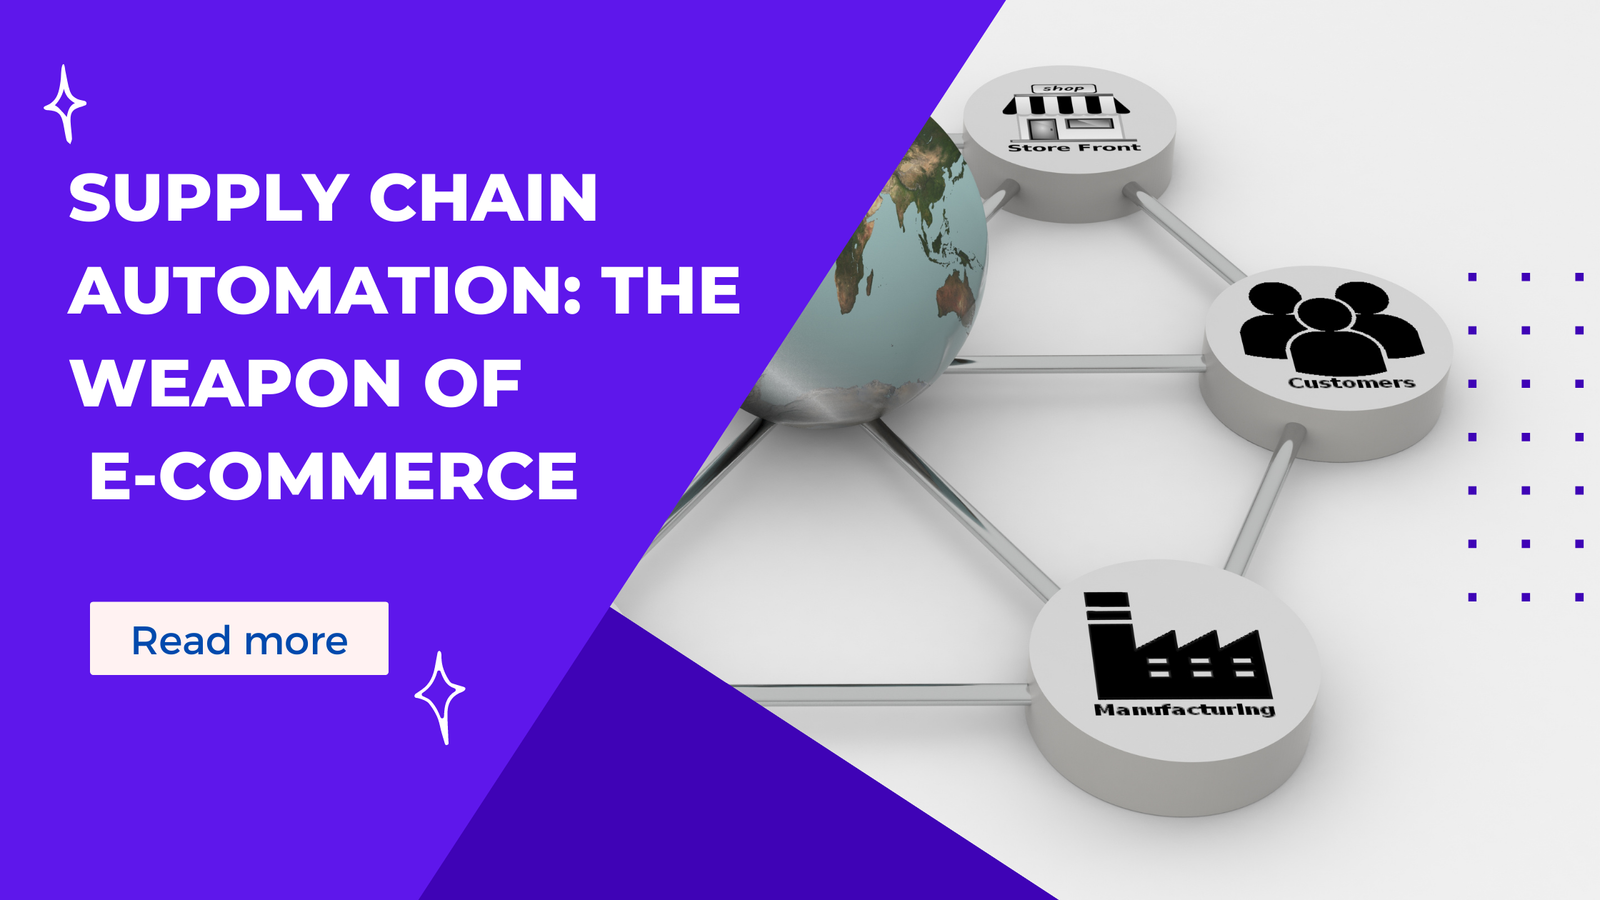 Supply Chain Automation: The Weapon of E-commerce